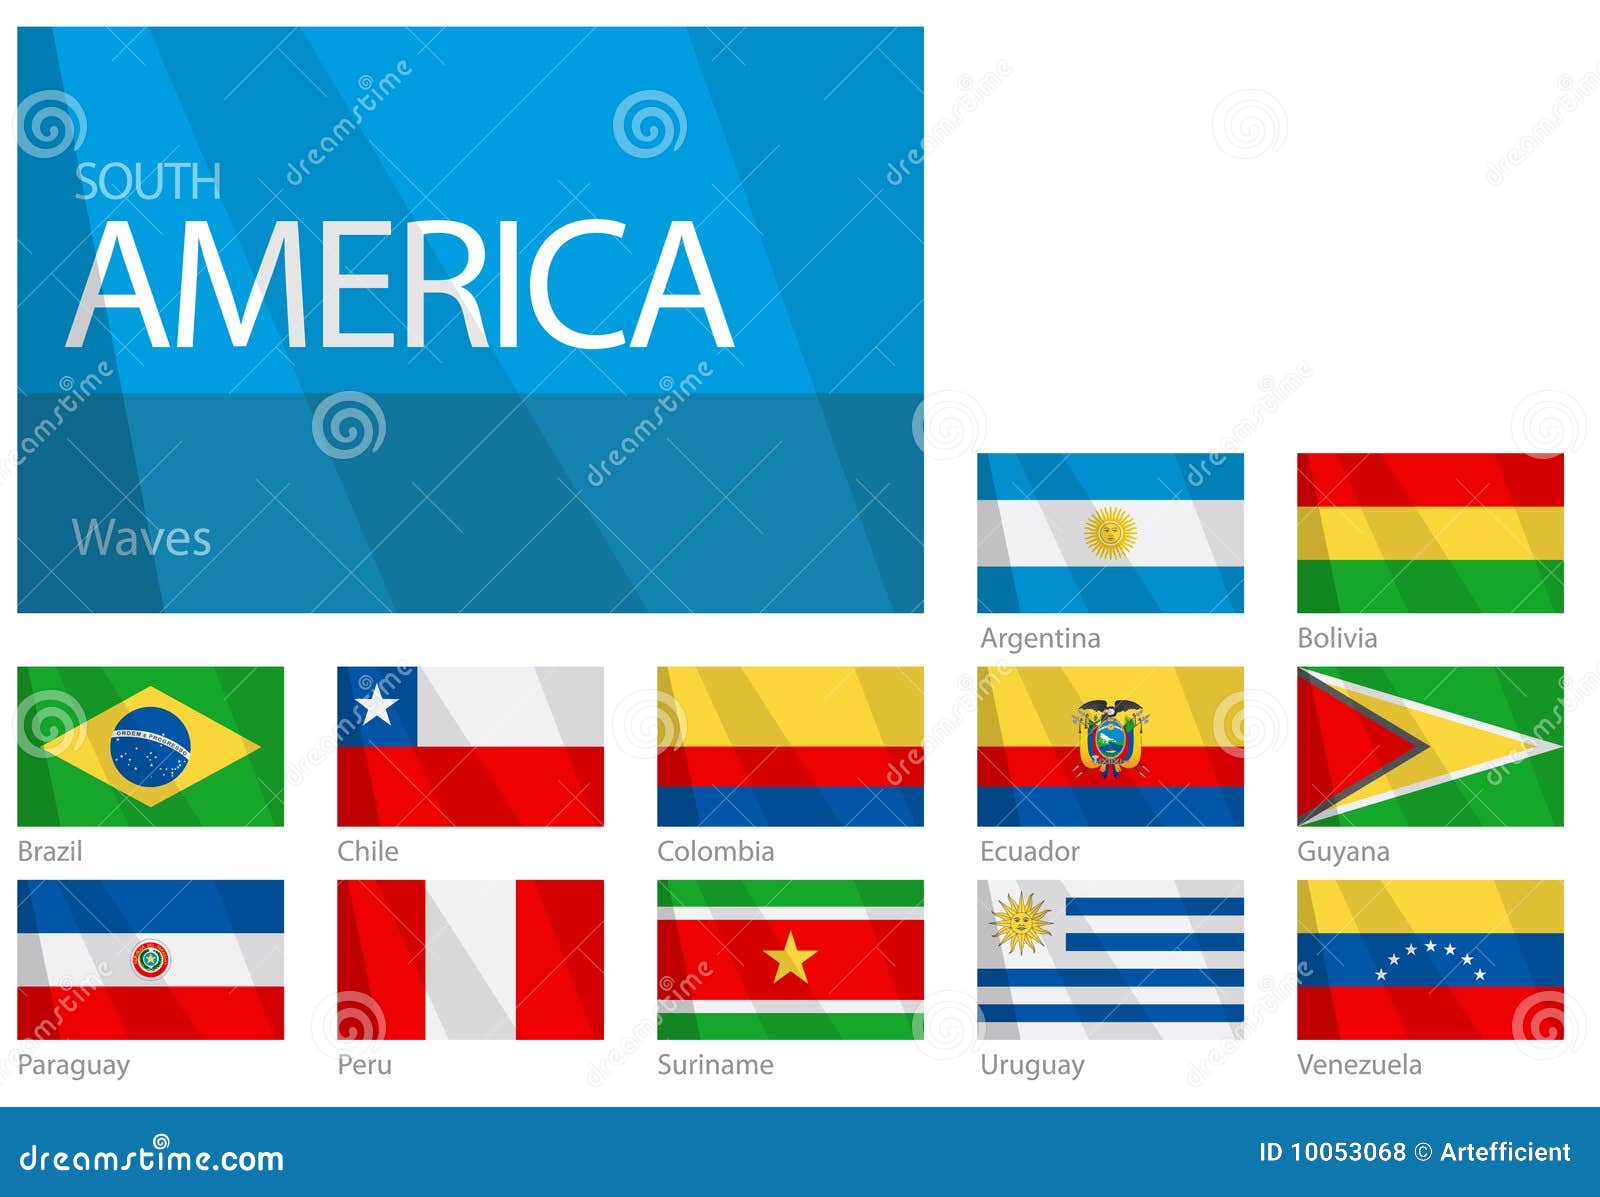 Waving Flags Of The World Collection Of Flags Full Set Of National